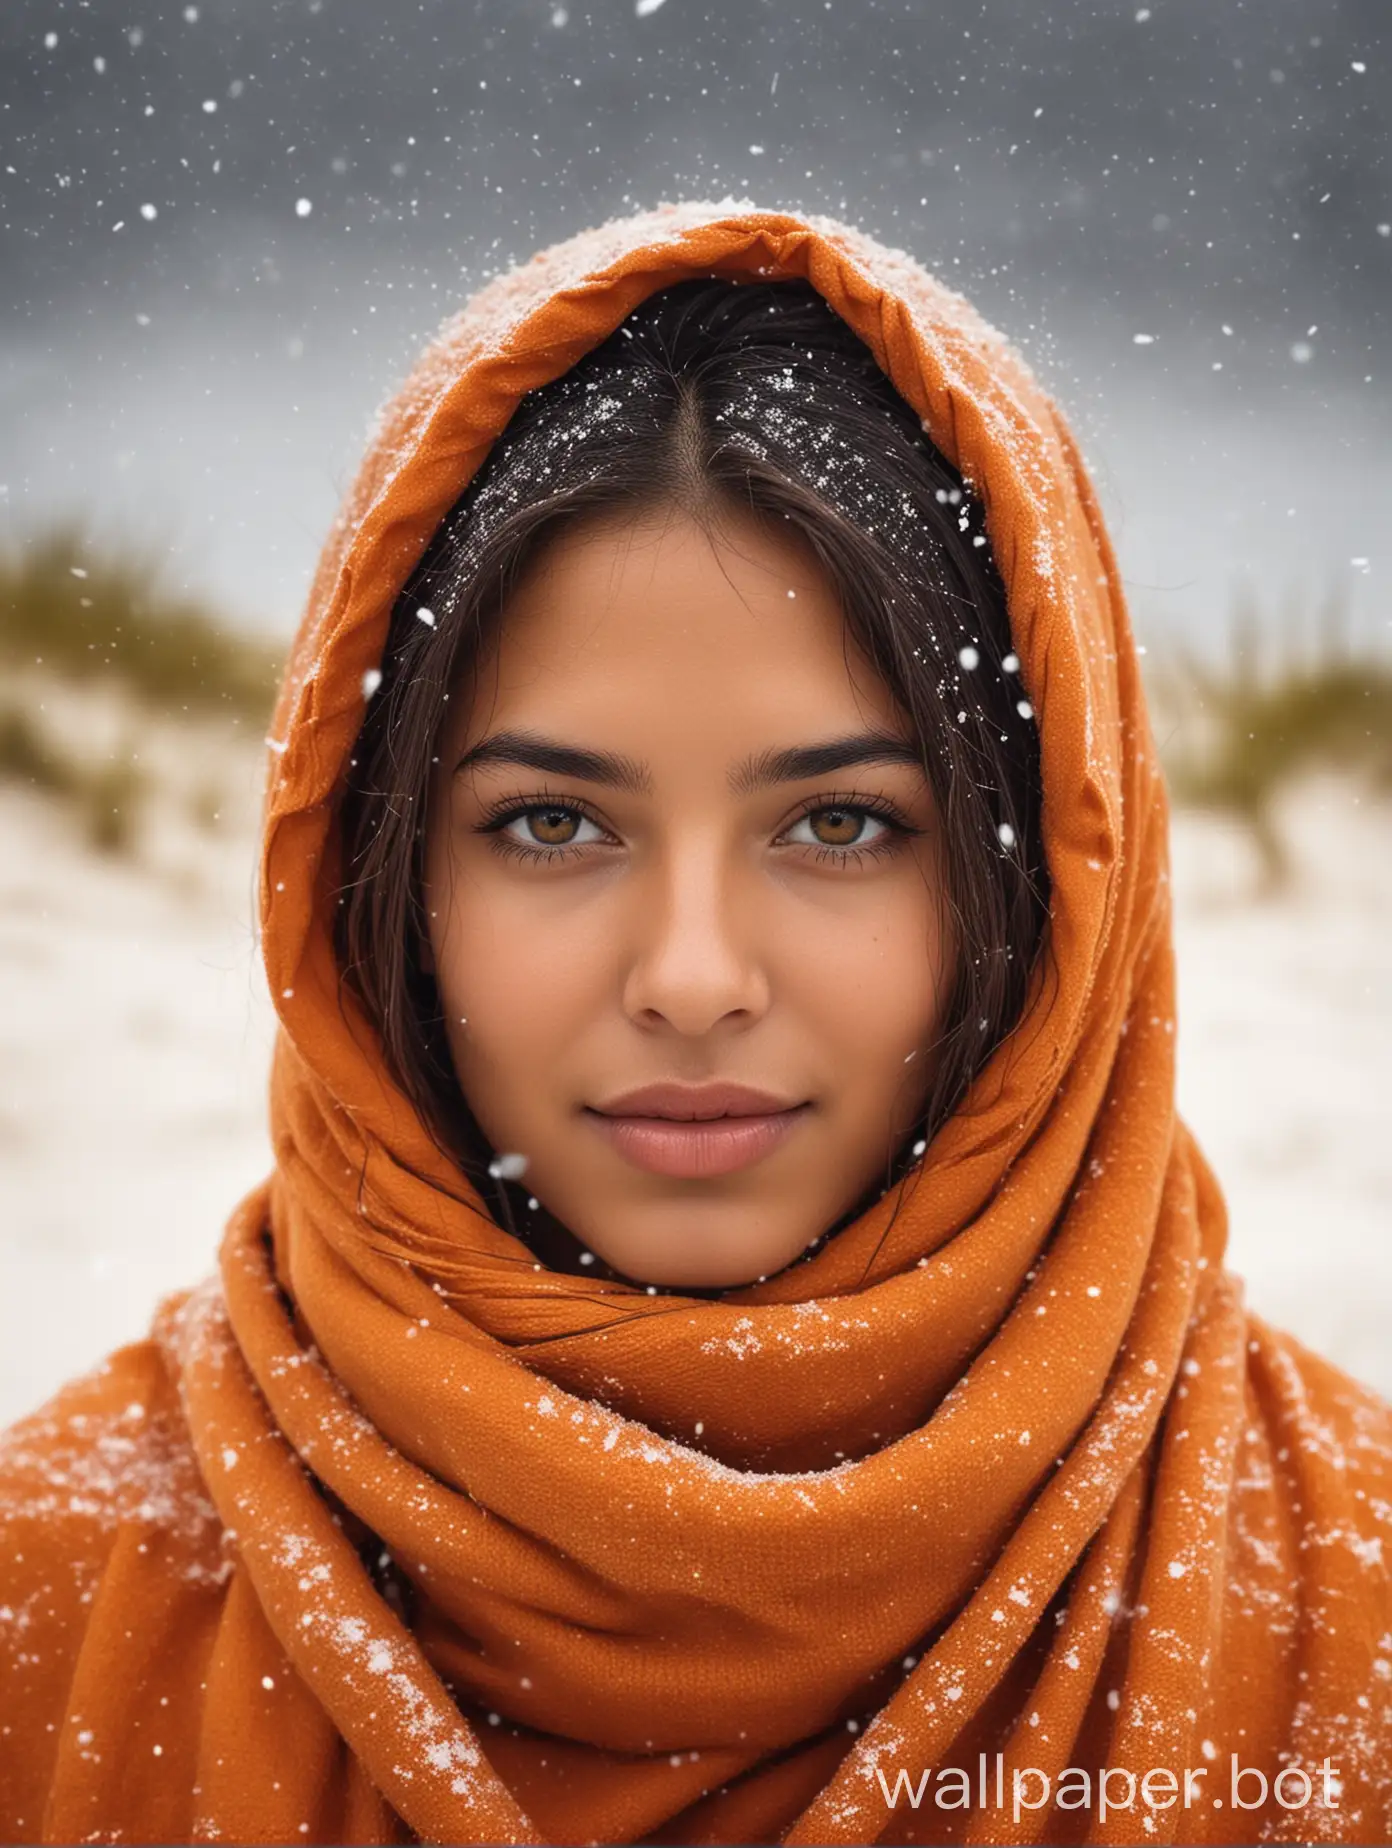 Brazilian girl wearing a weather with orange shawl over her head and face with background of vibrant winter dunes snowing